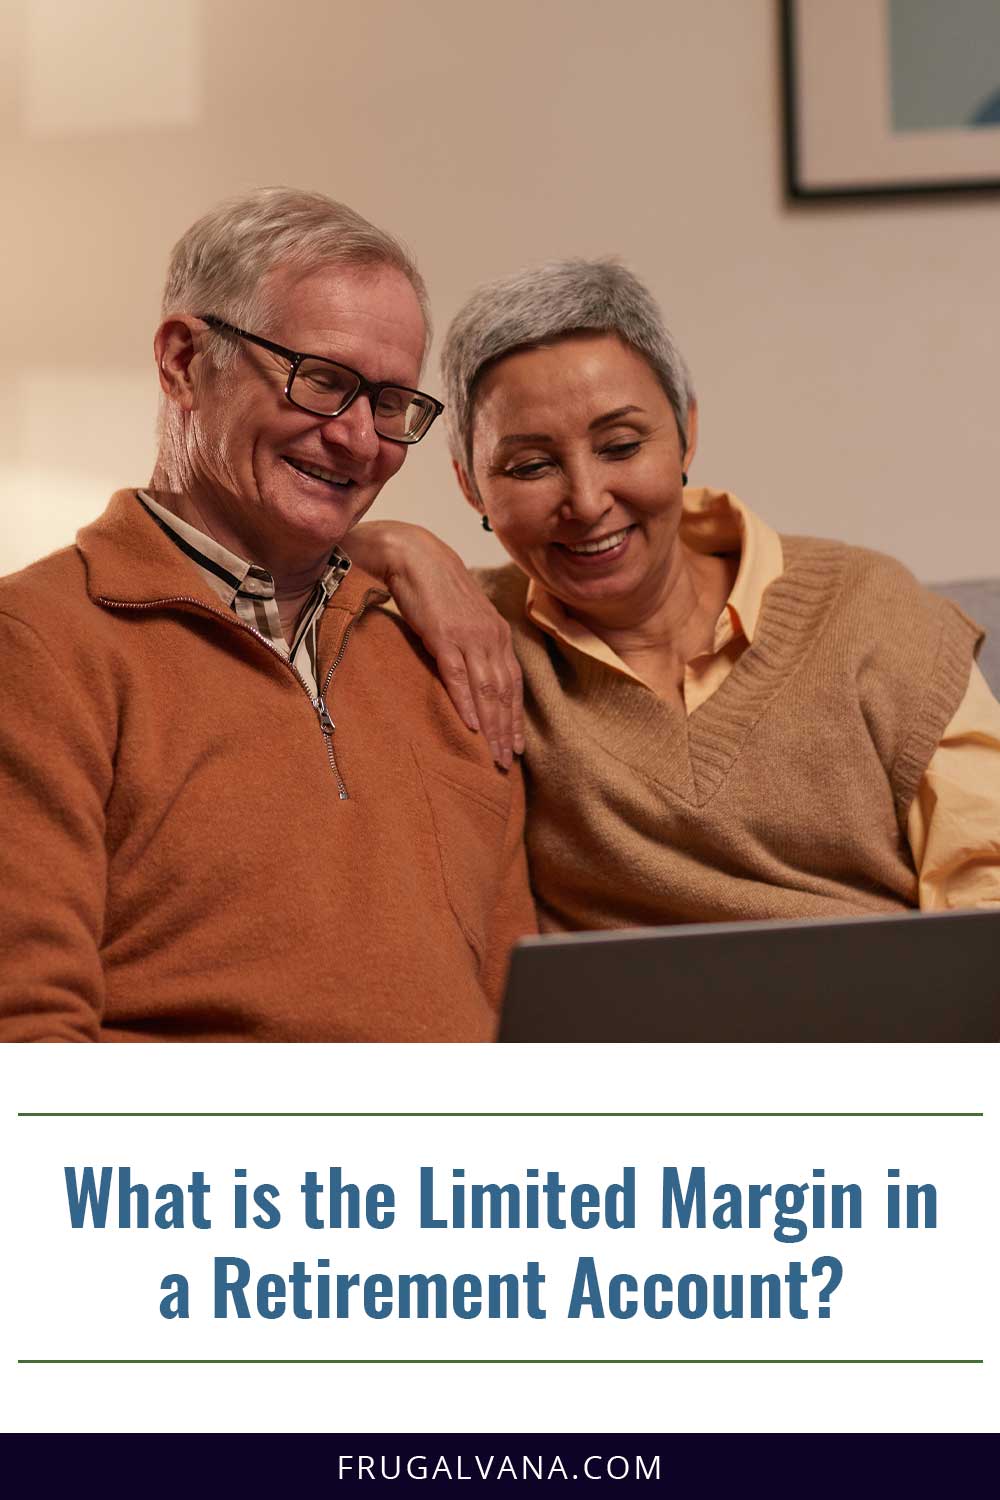 What is the Limited Margin in a Retirement Account?